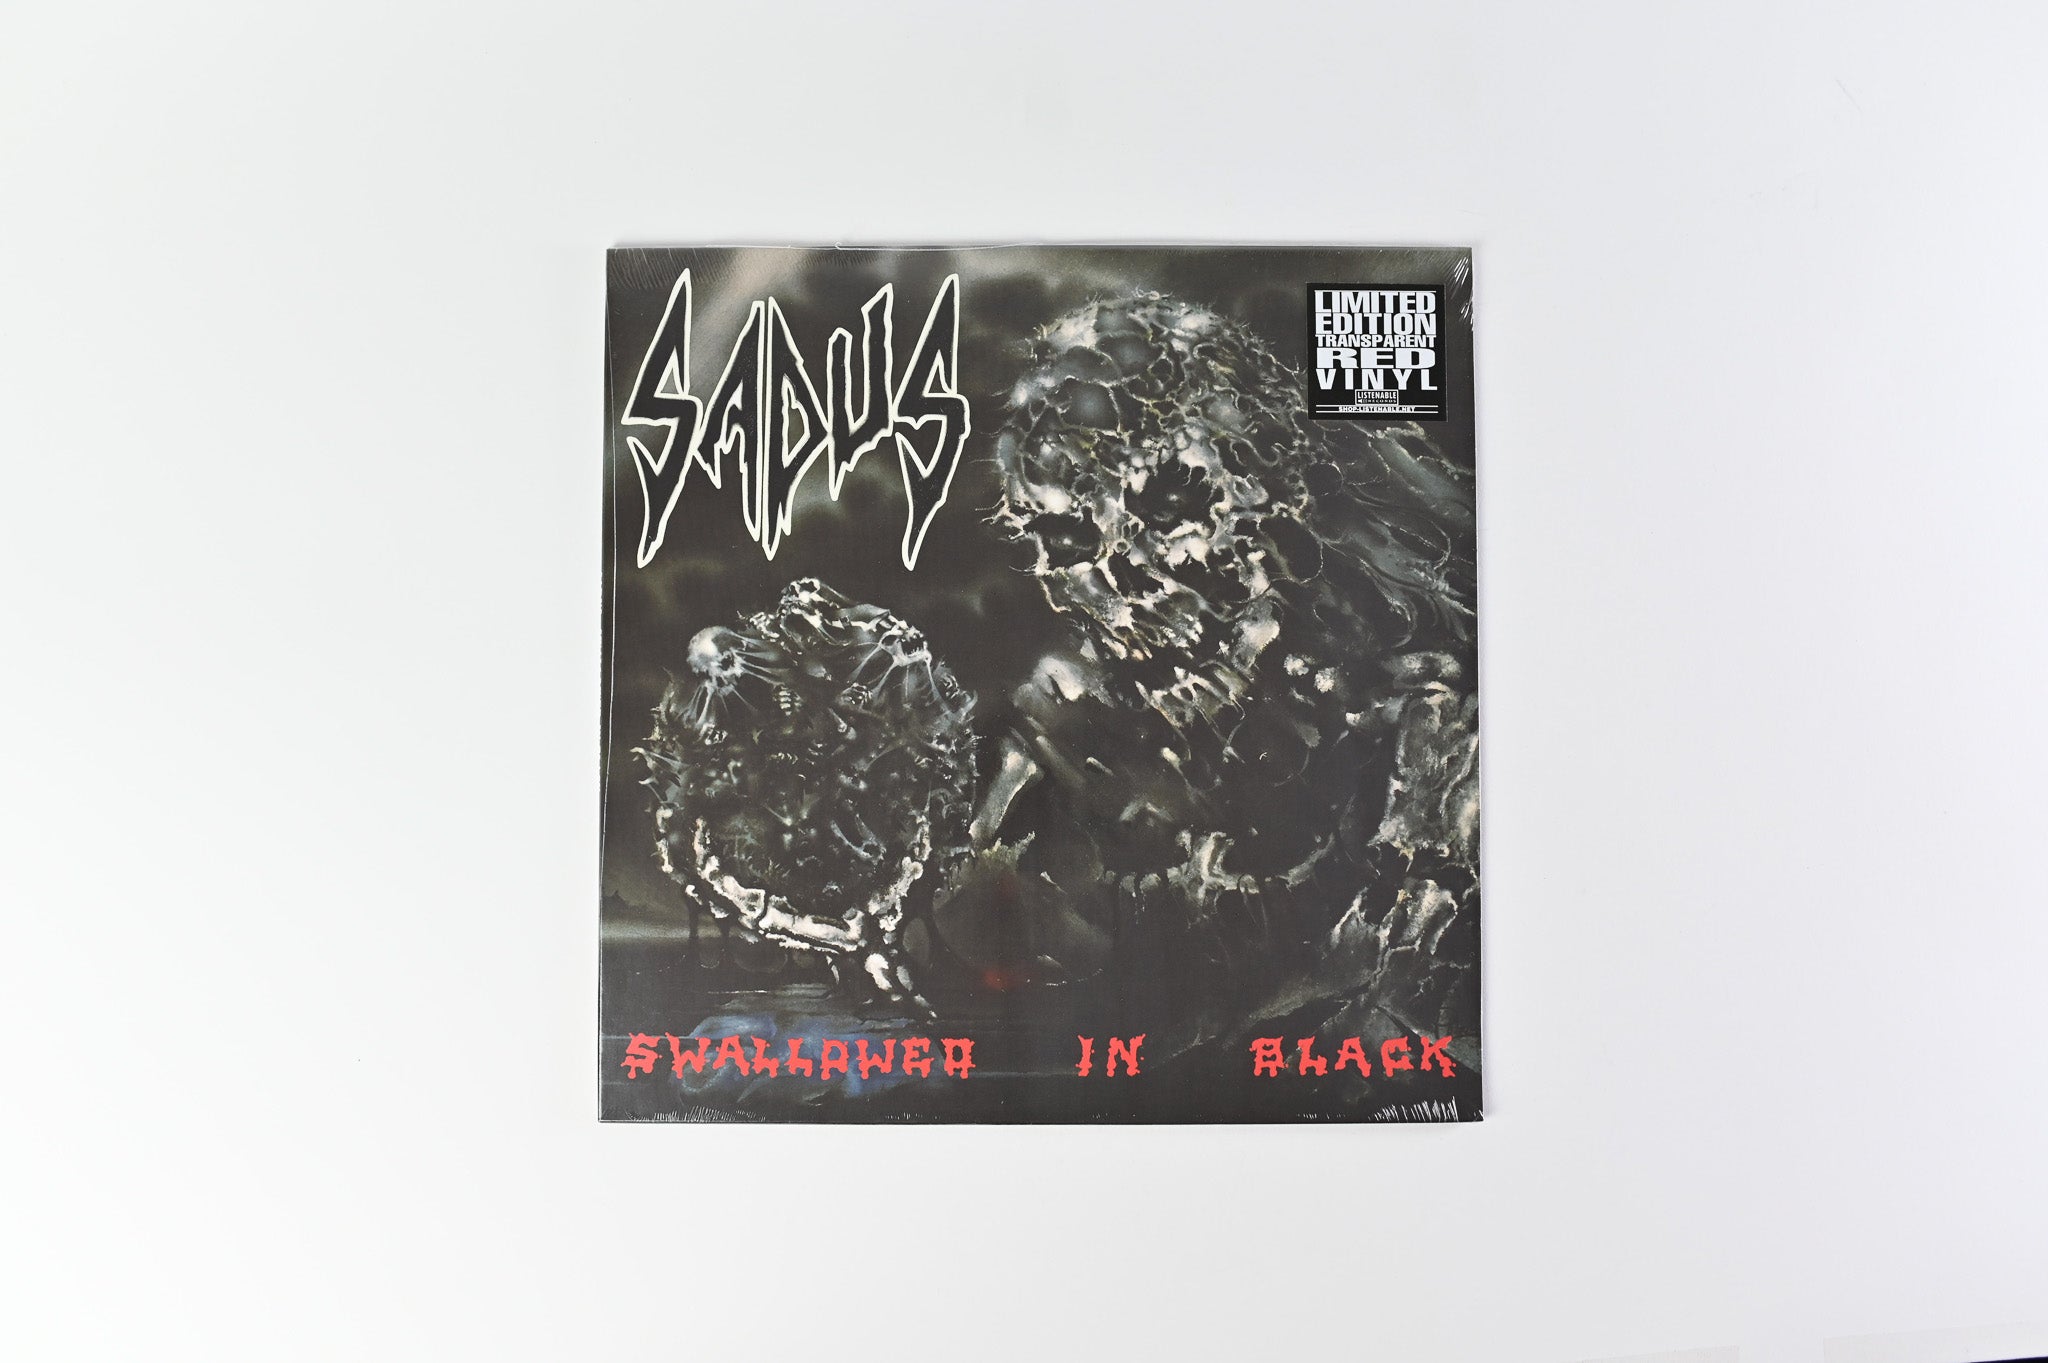 Sadus - Swallowed In Black on Listenable Records Transparent Red Vinyl Reissue Sealed